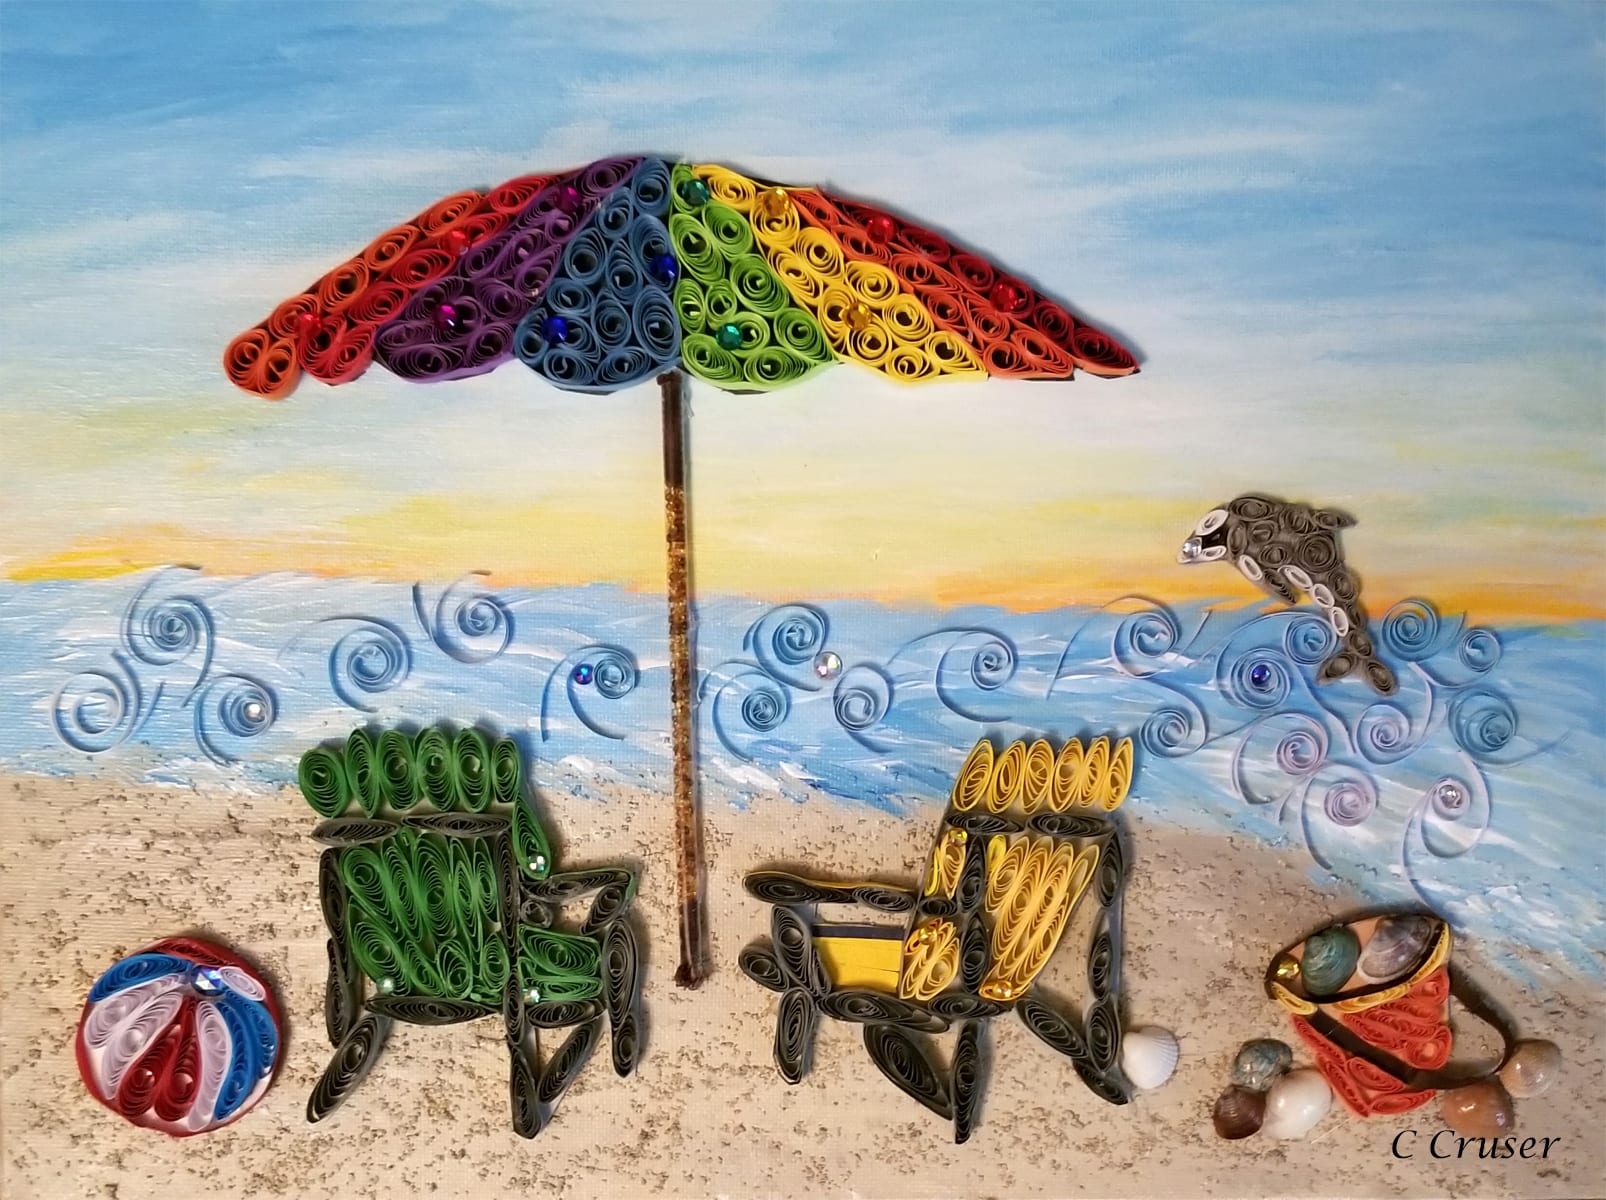 Connie Cruser, Seaside Serenity,  paper quilled artwork on an acrylic painted background, 16 x 12 inches